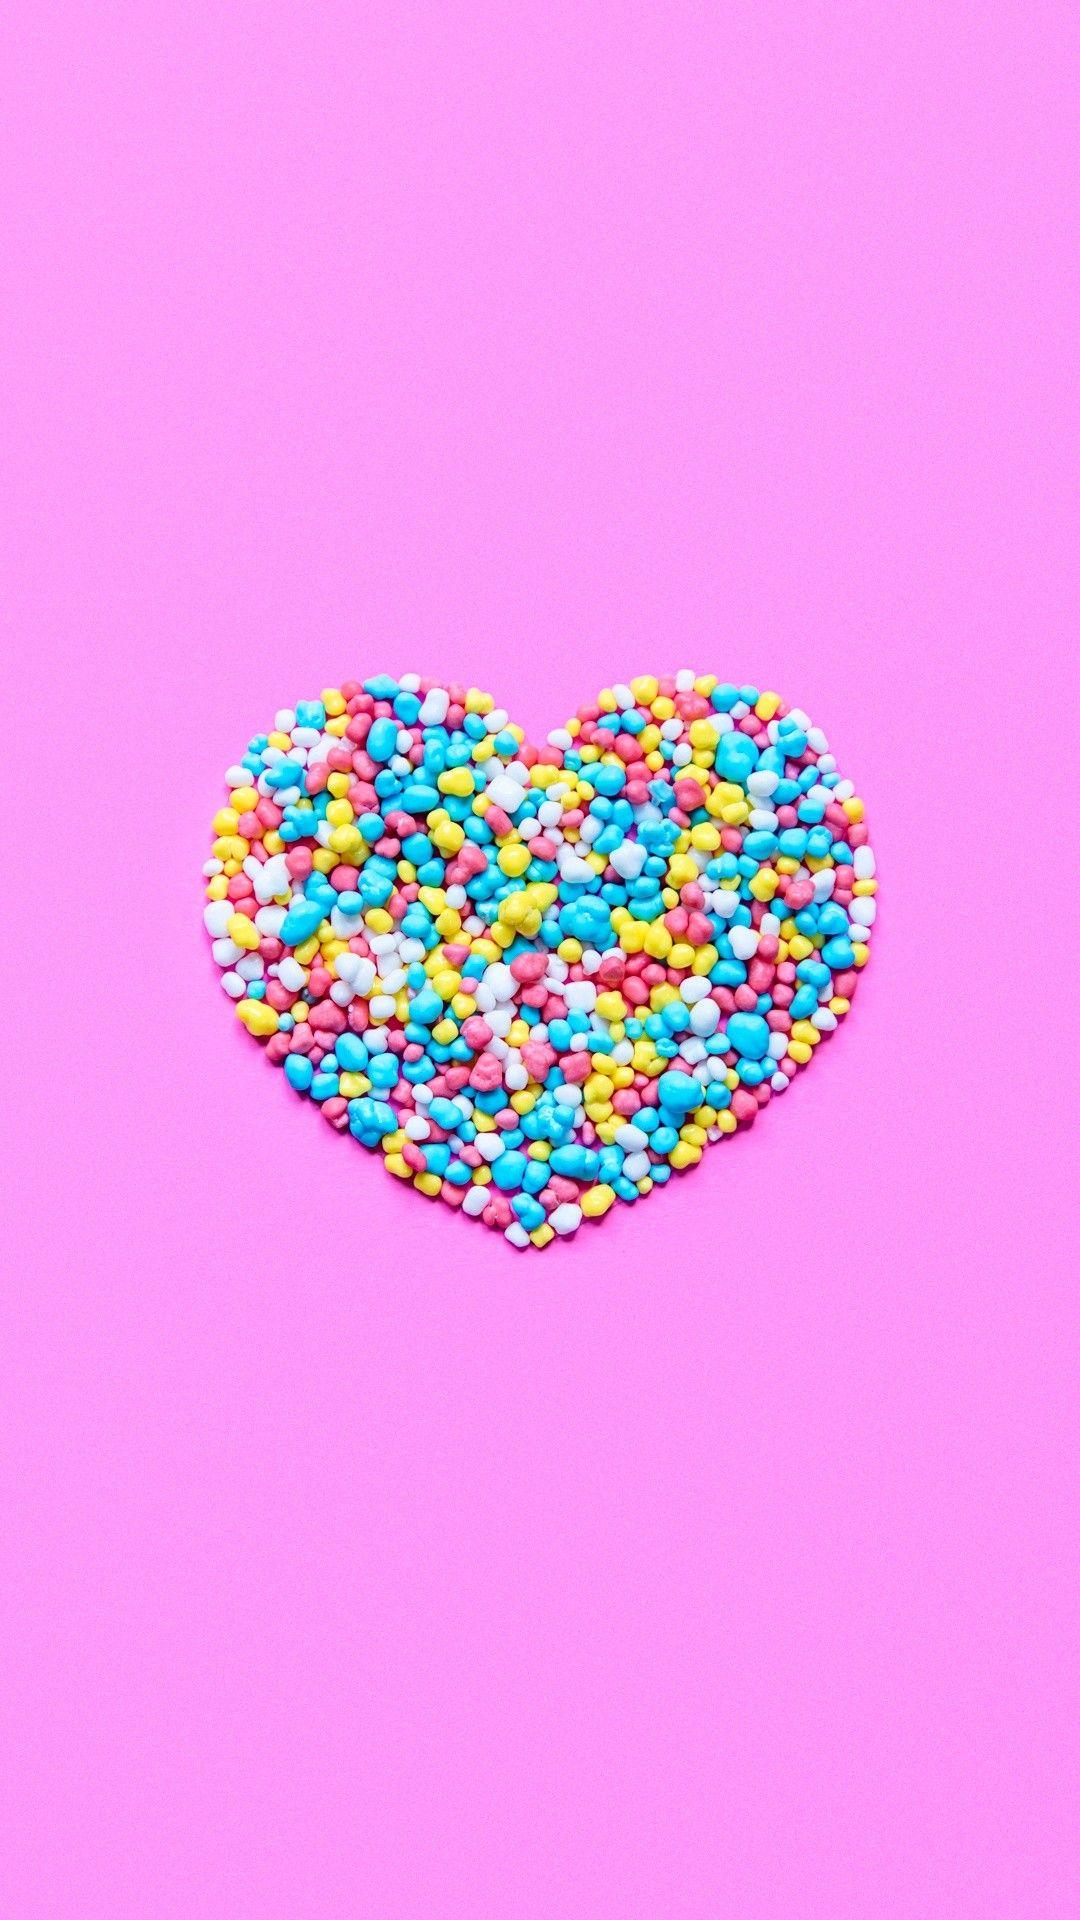 Heart Candy wallpaper by Alee  Download on ZEDGE  acce